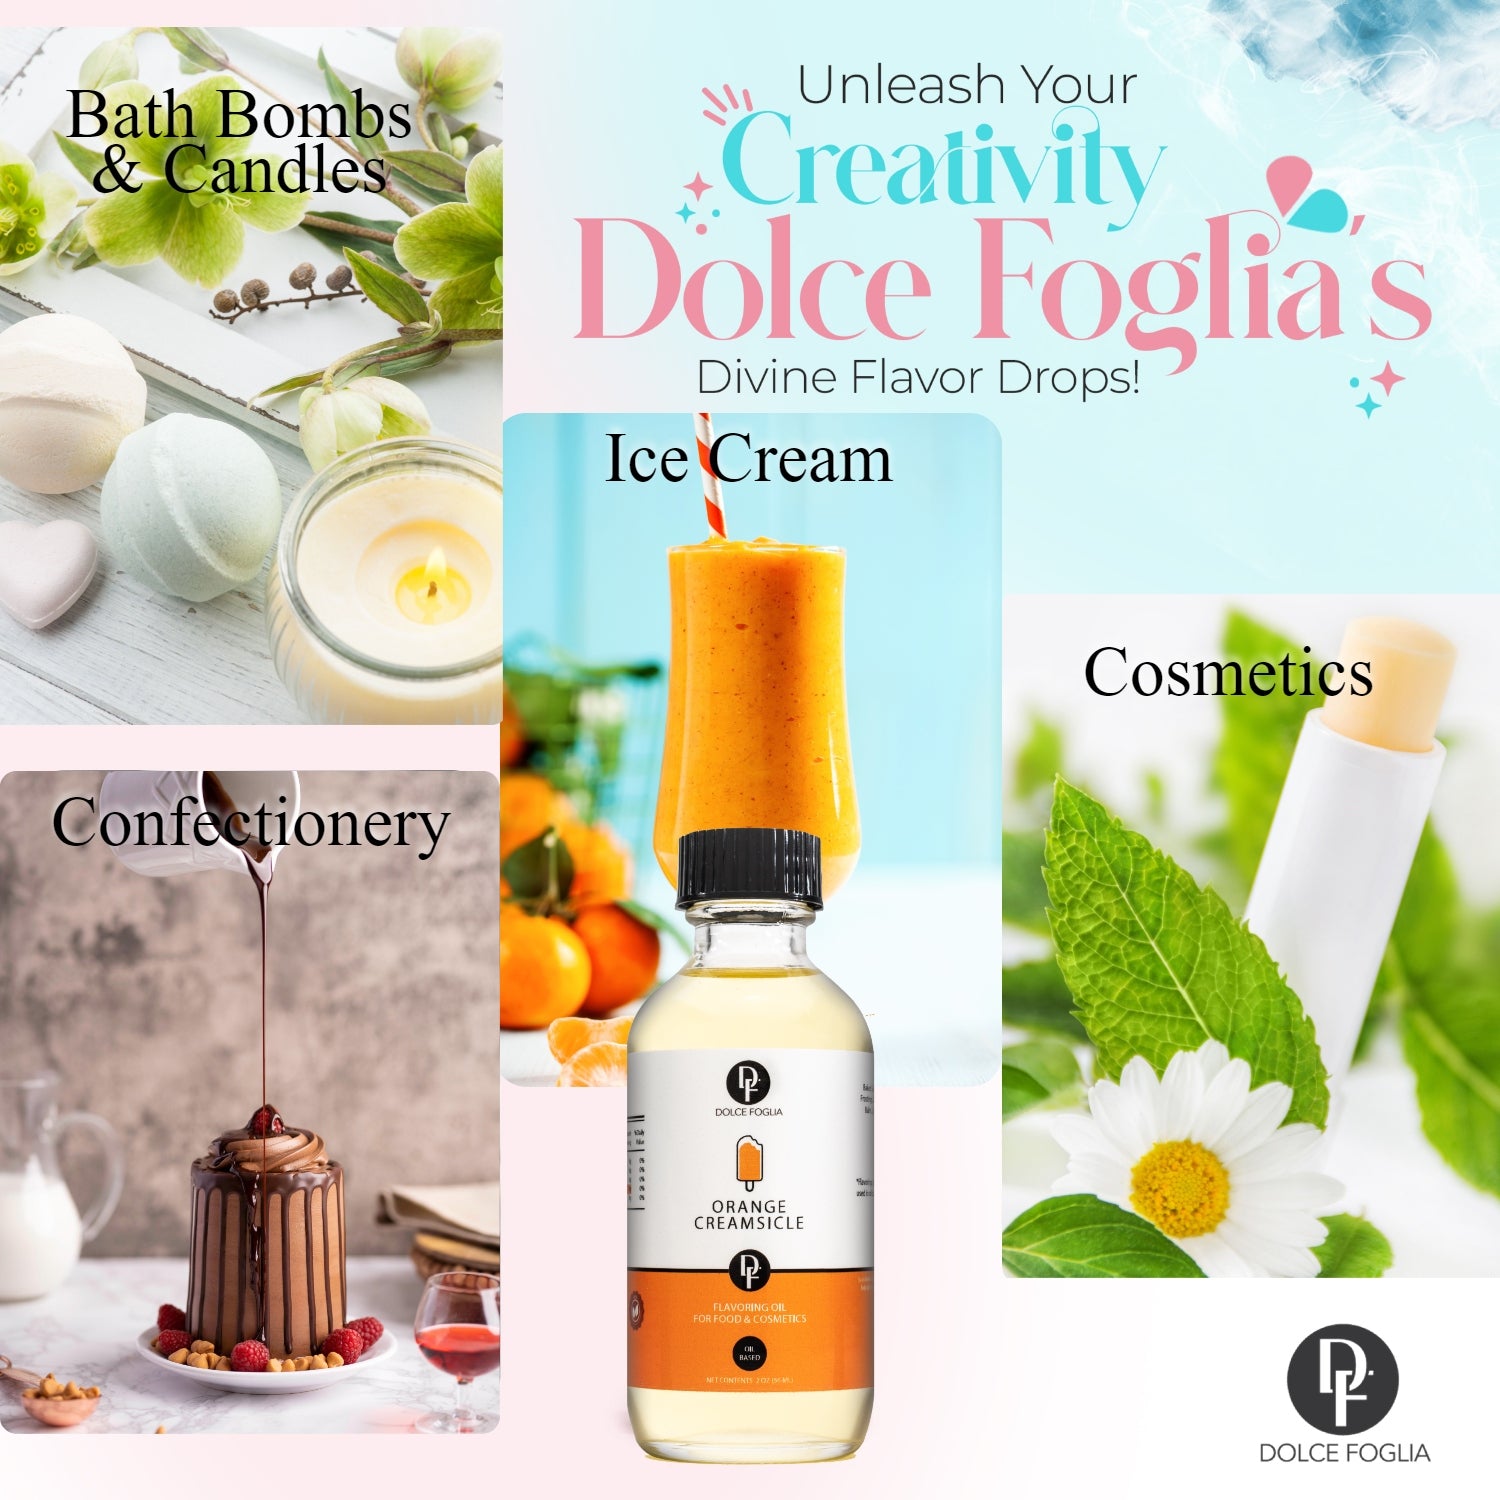  Dolce Foglia Anise Extract - 2 Oz. Multipurpose Anise Oil for  Candy Making, Baking, Lip Balm, Ice Cream, Ultra Concentrated All Natural  Ingredients : Grocery & Gourmet Food